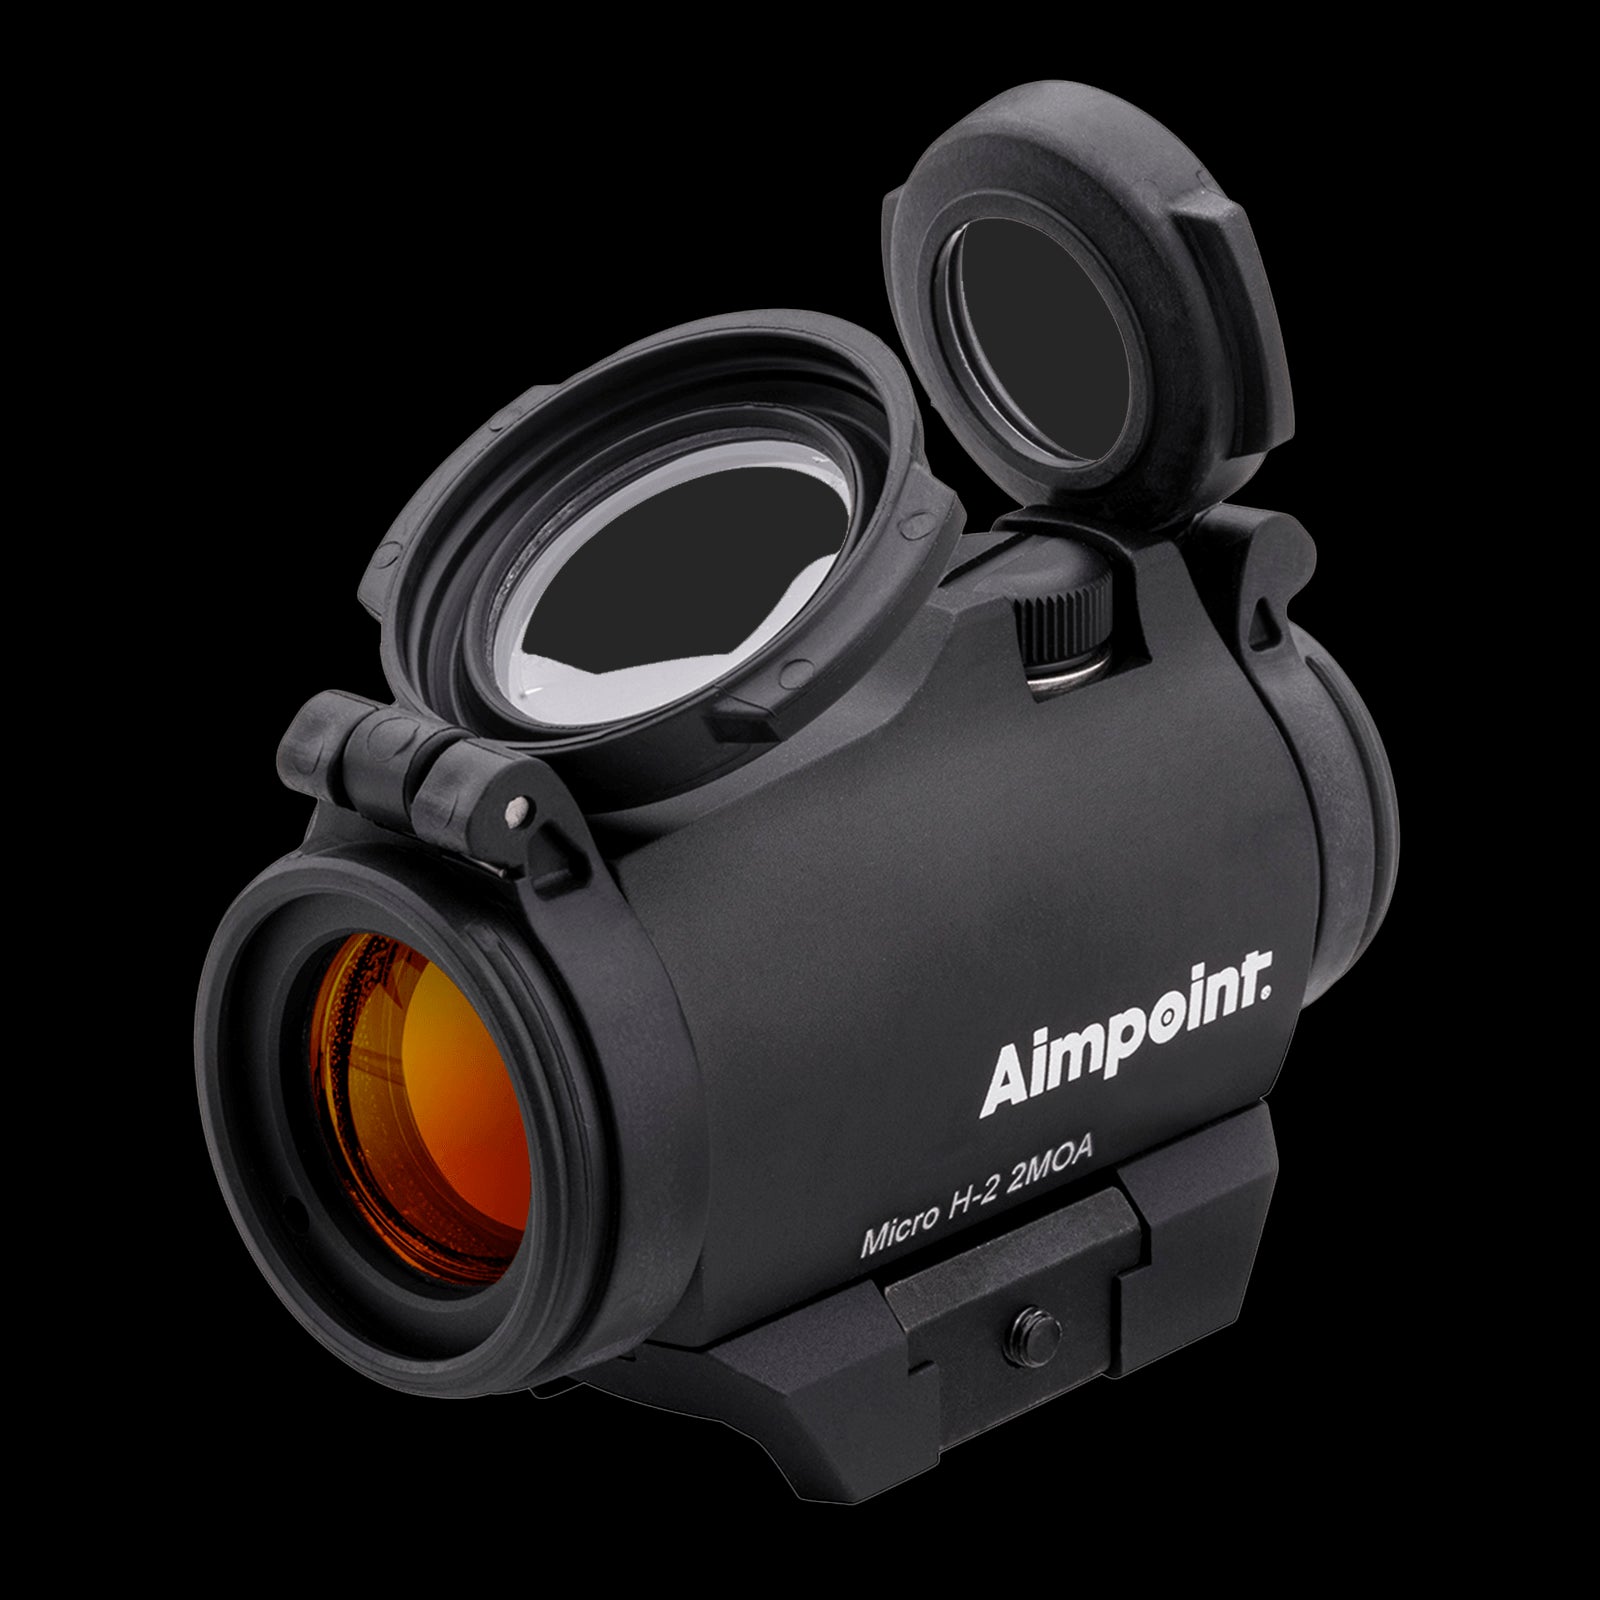 Aimpoint - Micro H-2™ 2 MOA Red dot